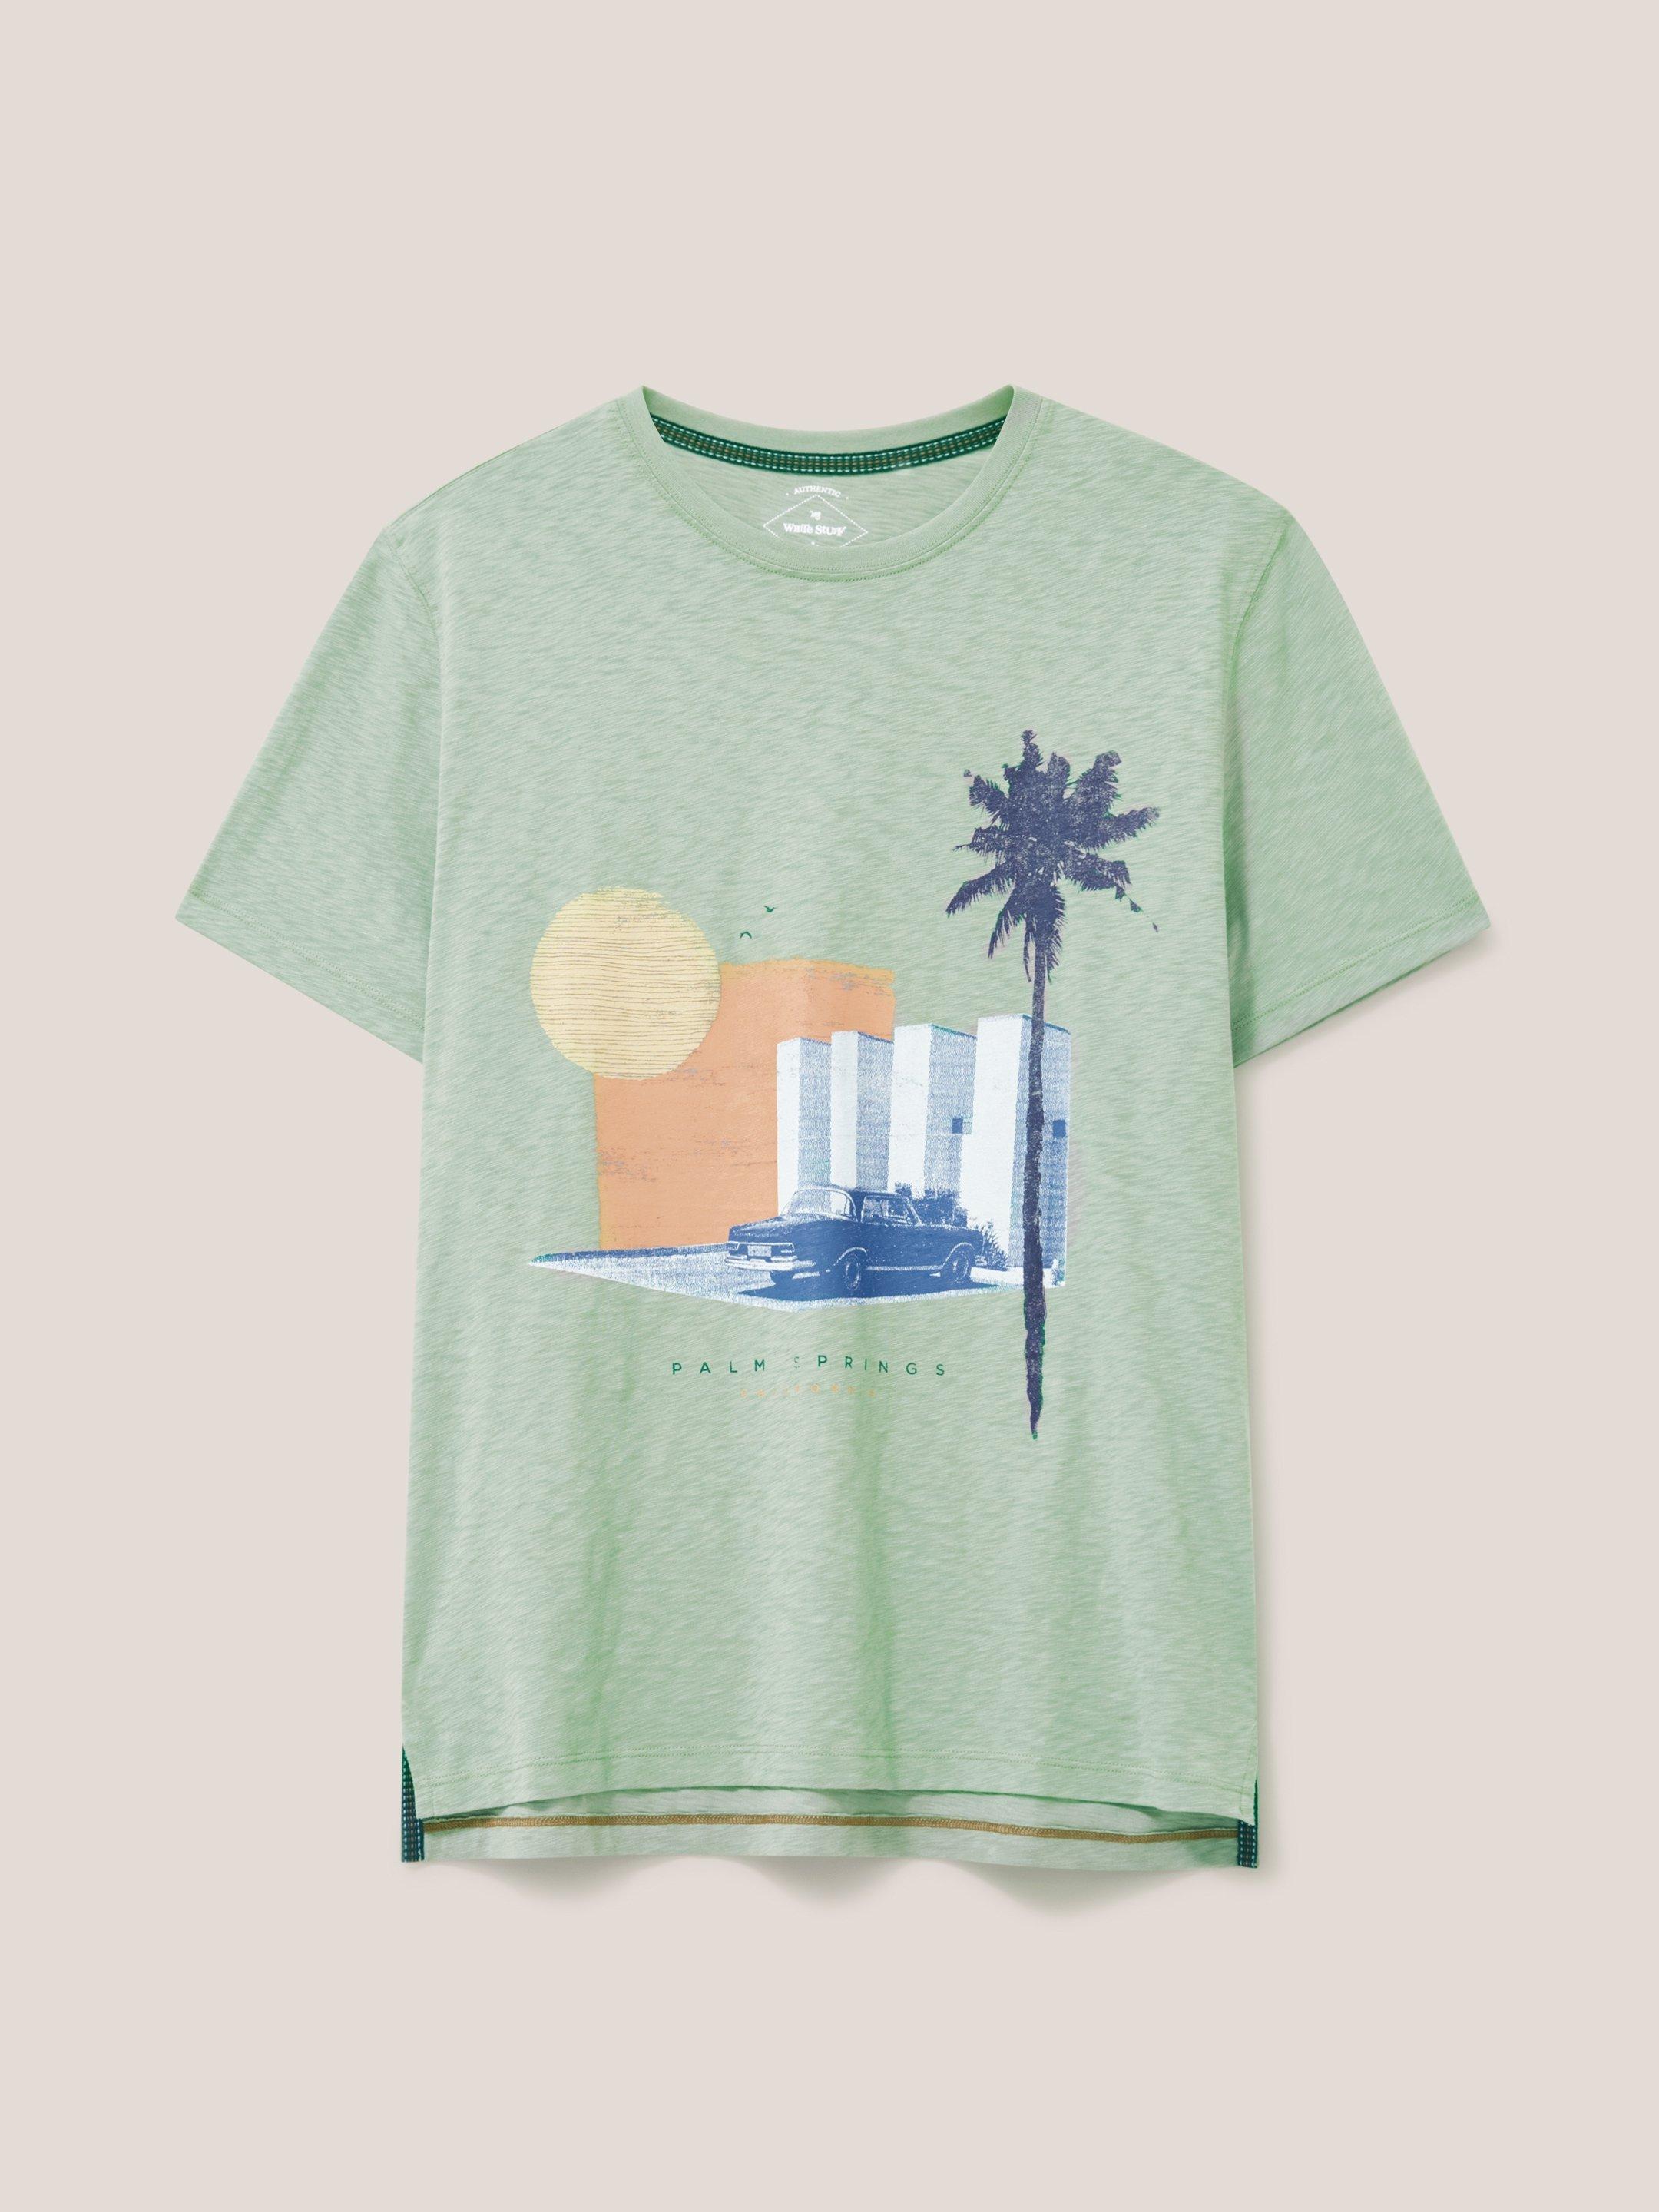 Palm Springs Graphic Tee in DUS GREEN - FLAT FRONT